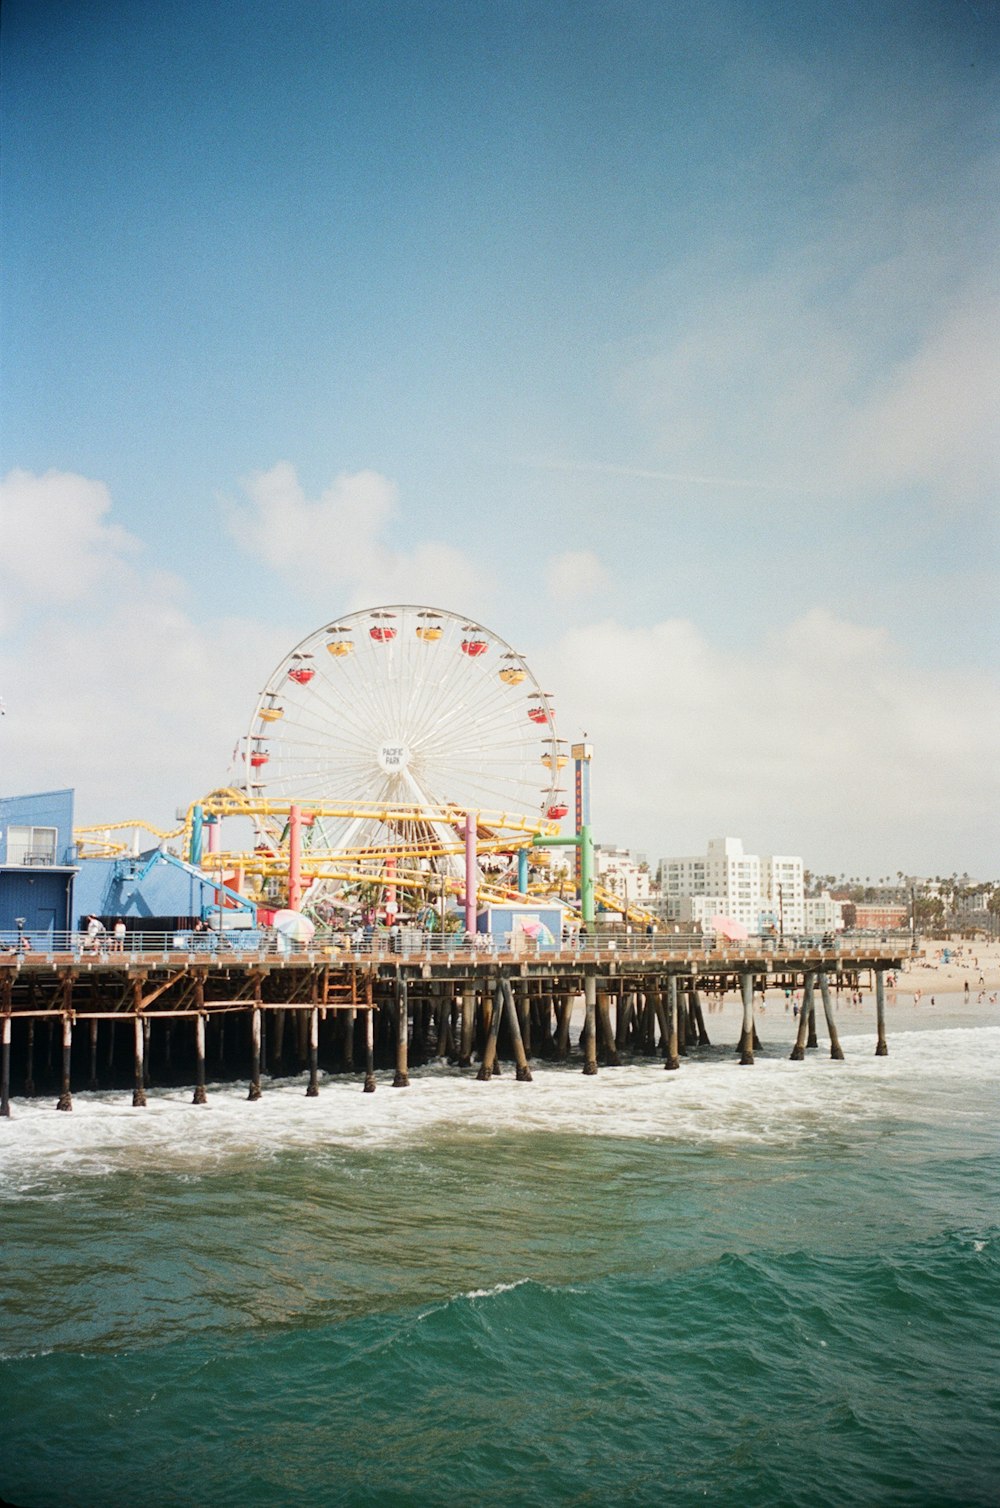 a ferris wheel sitting on top of a pier next to the ocean